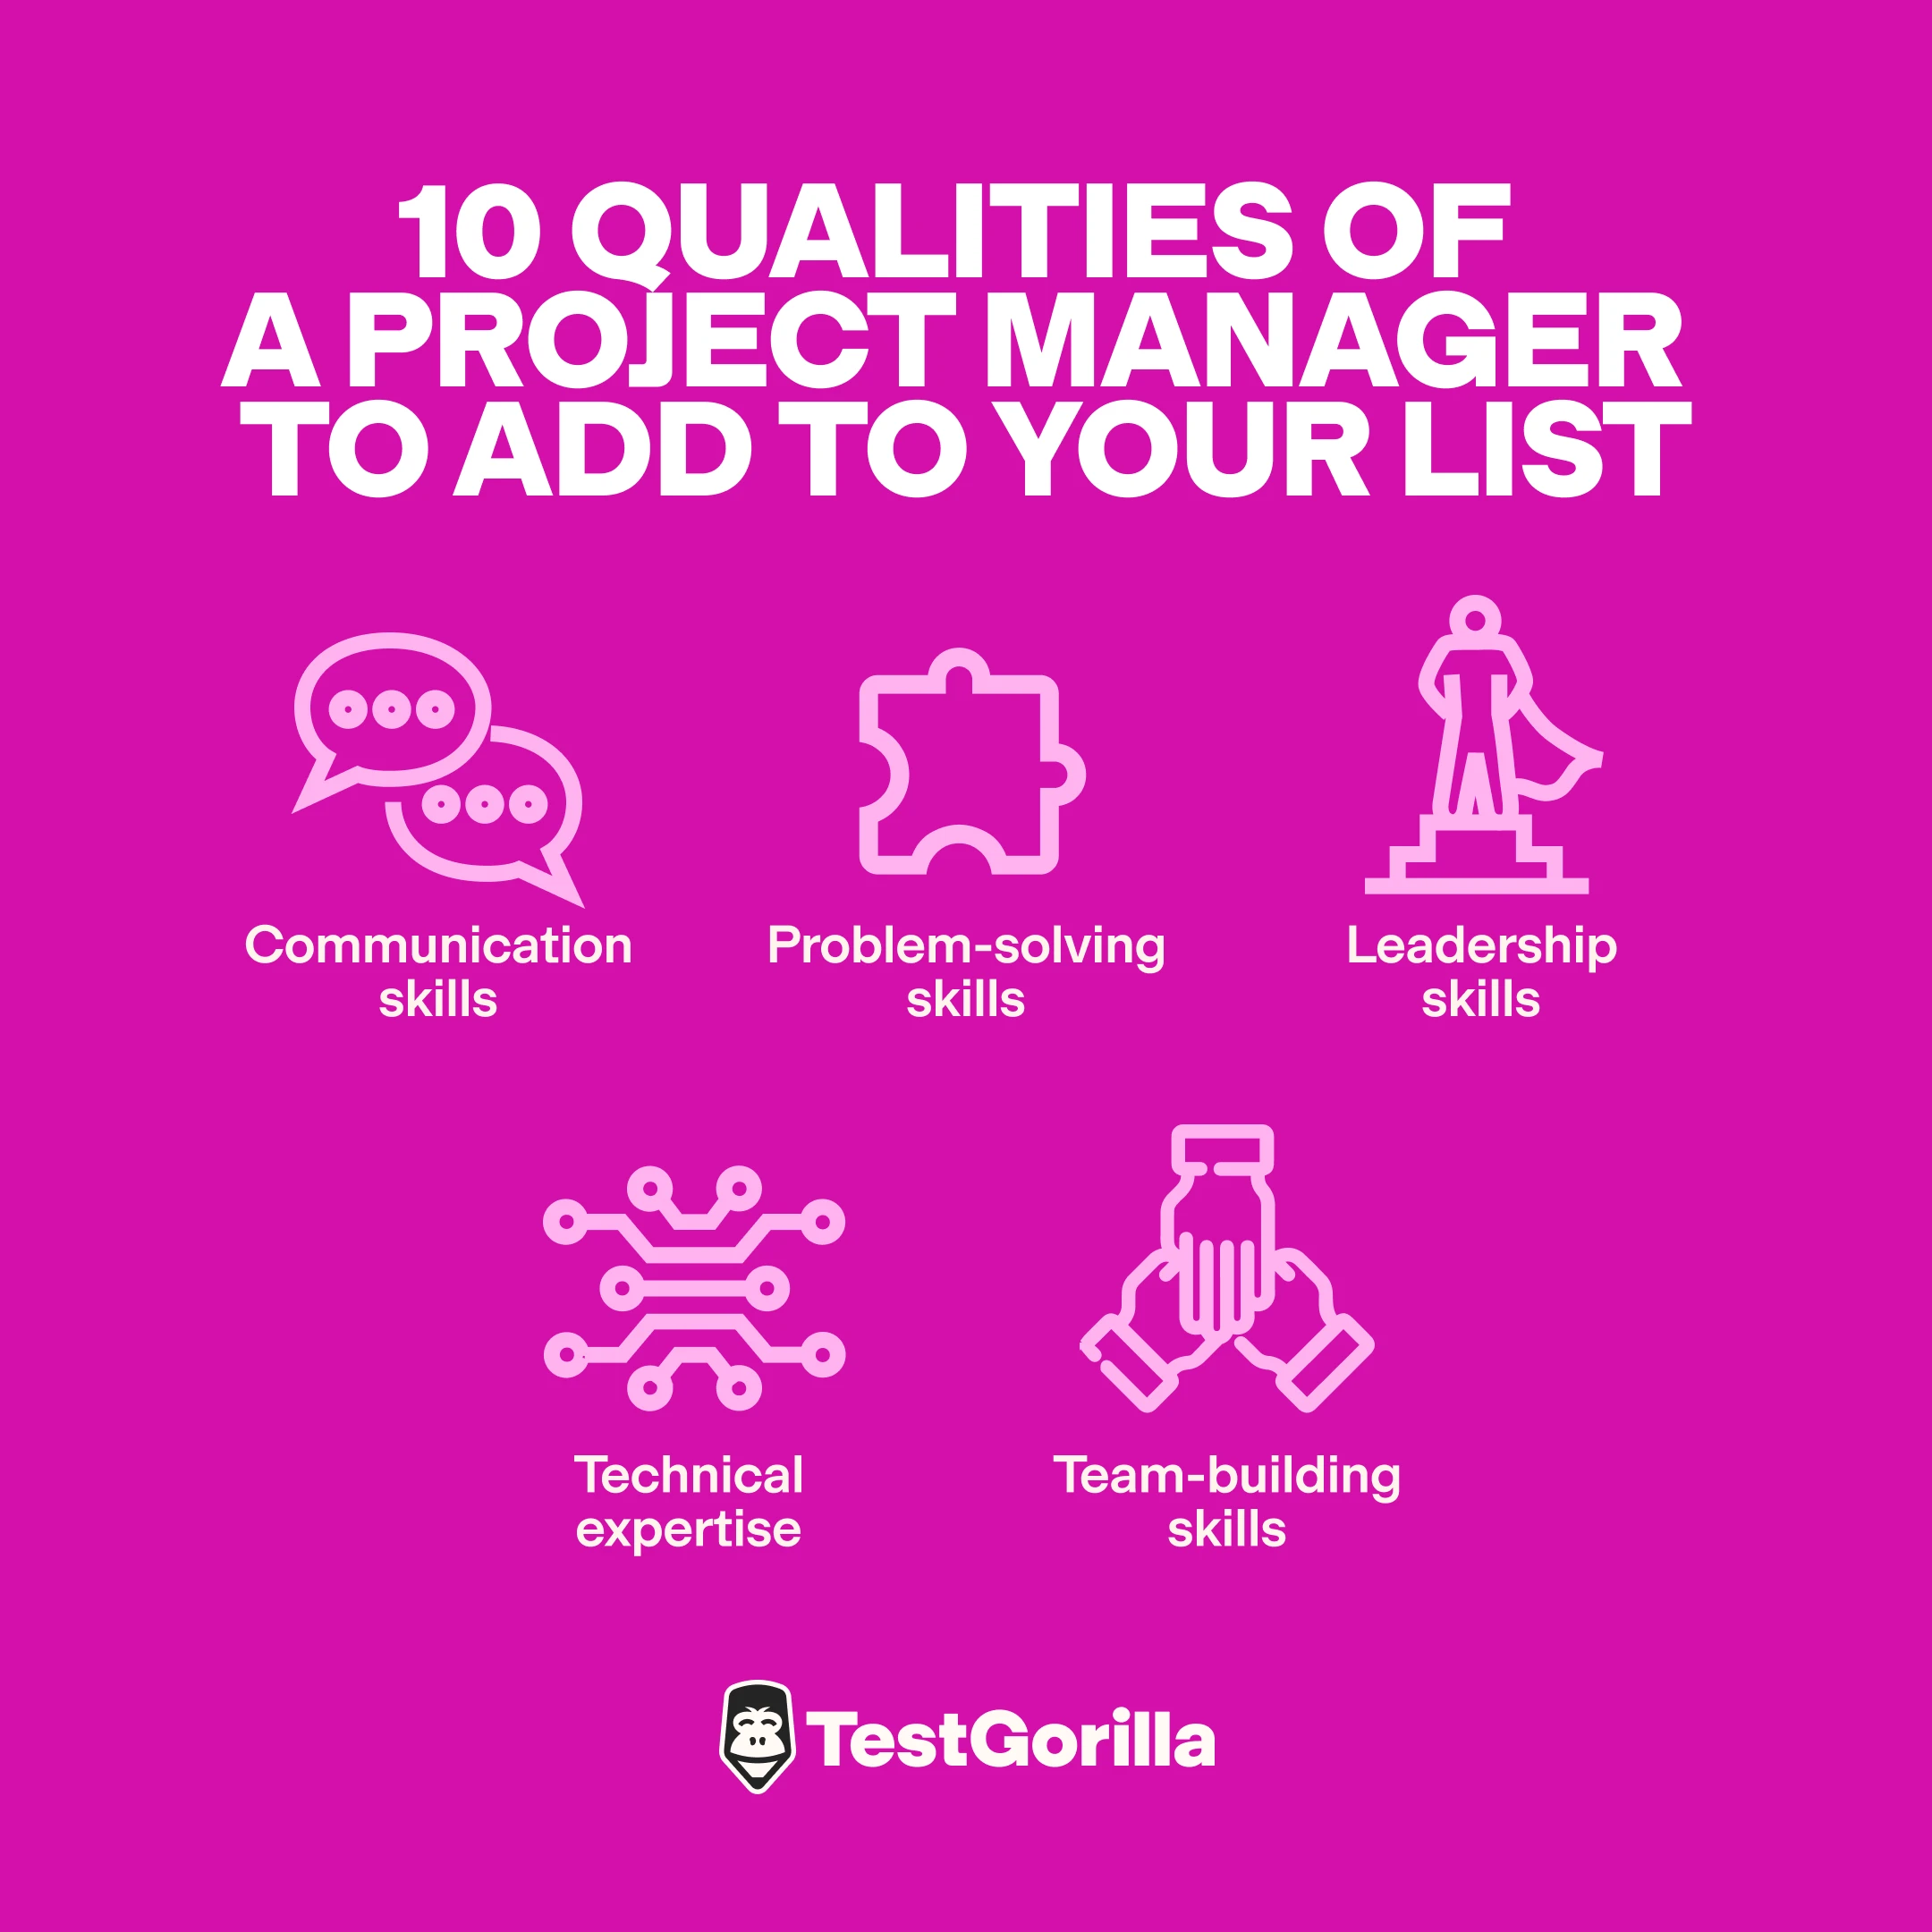 image showing qualities of a project manager to add to your list - set A